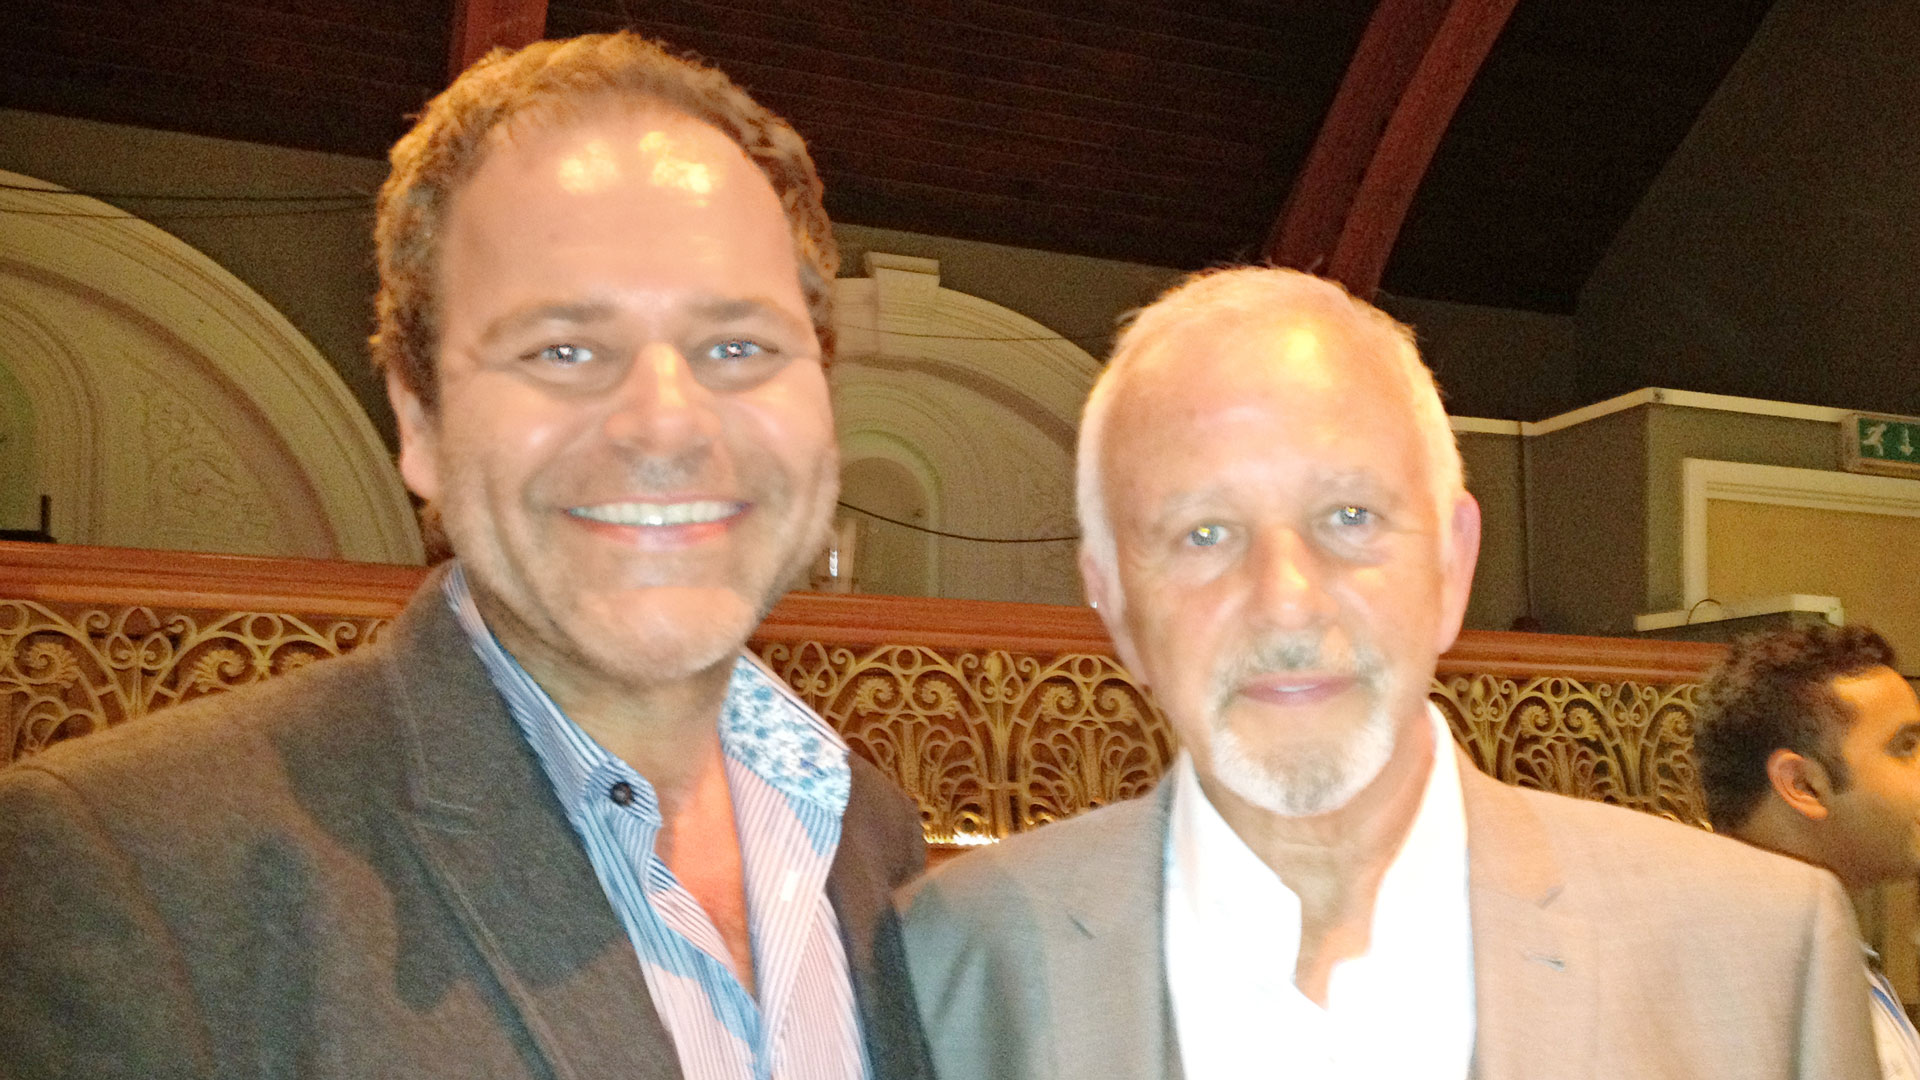 Glenn Kinsey with David Essex at the filming of 'A Gypsy Life For Me', Bio Channel